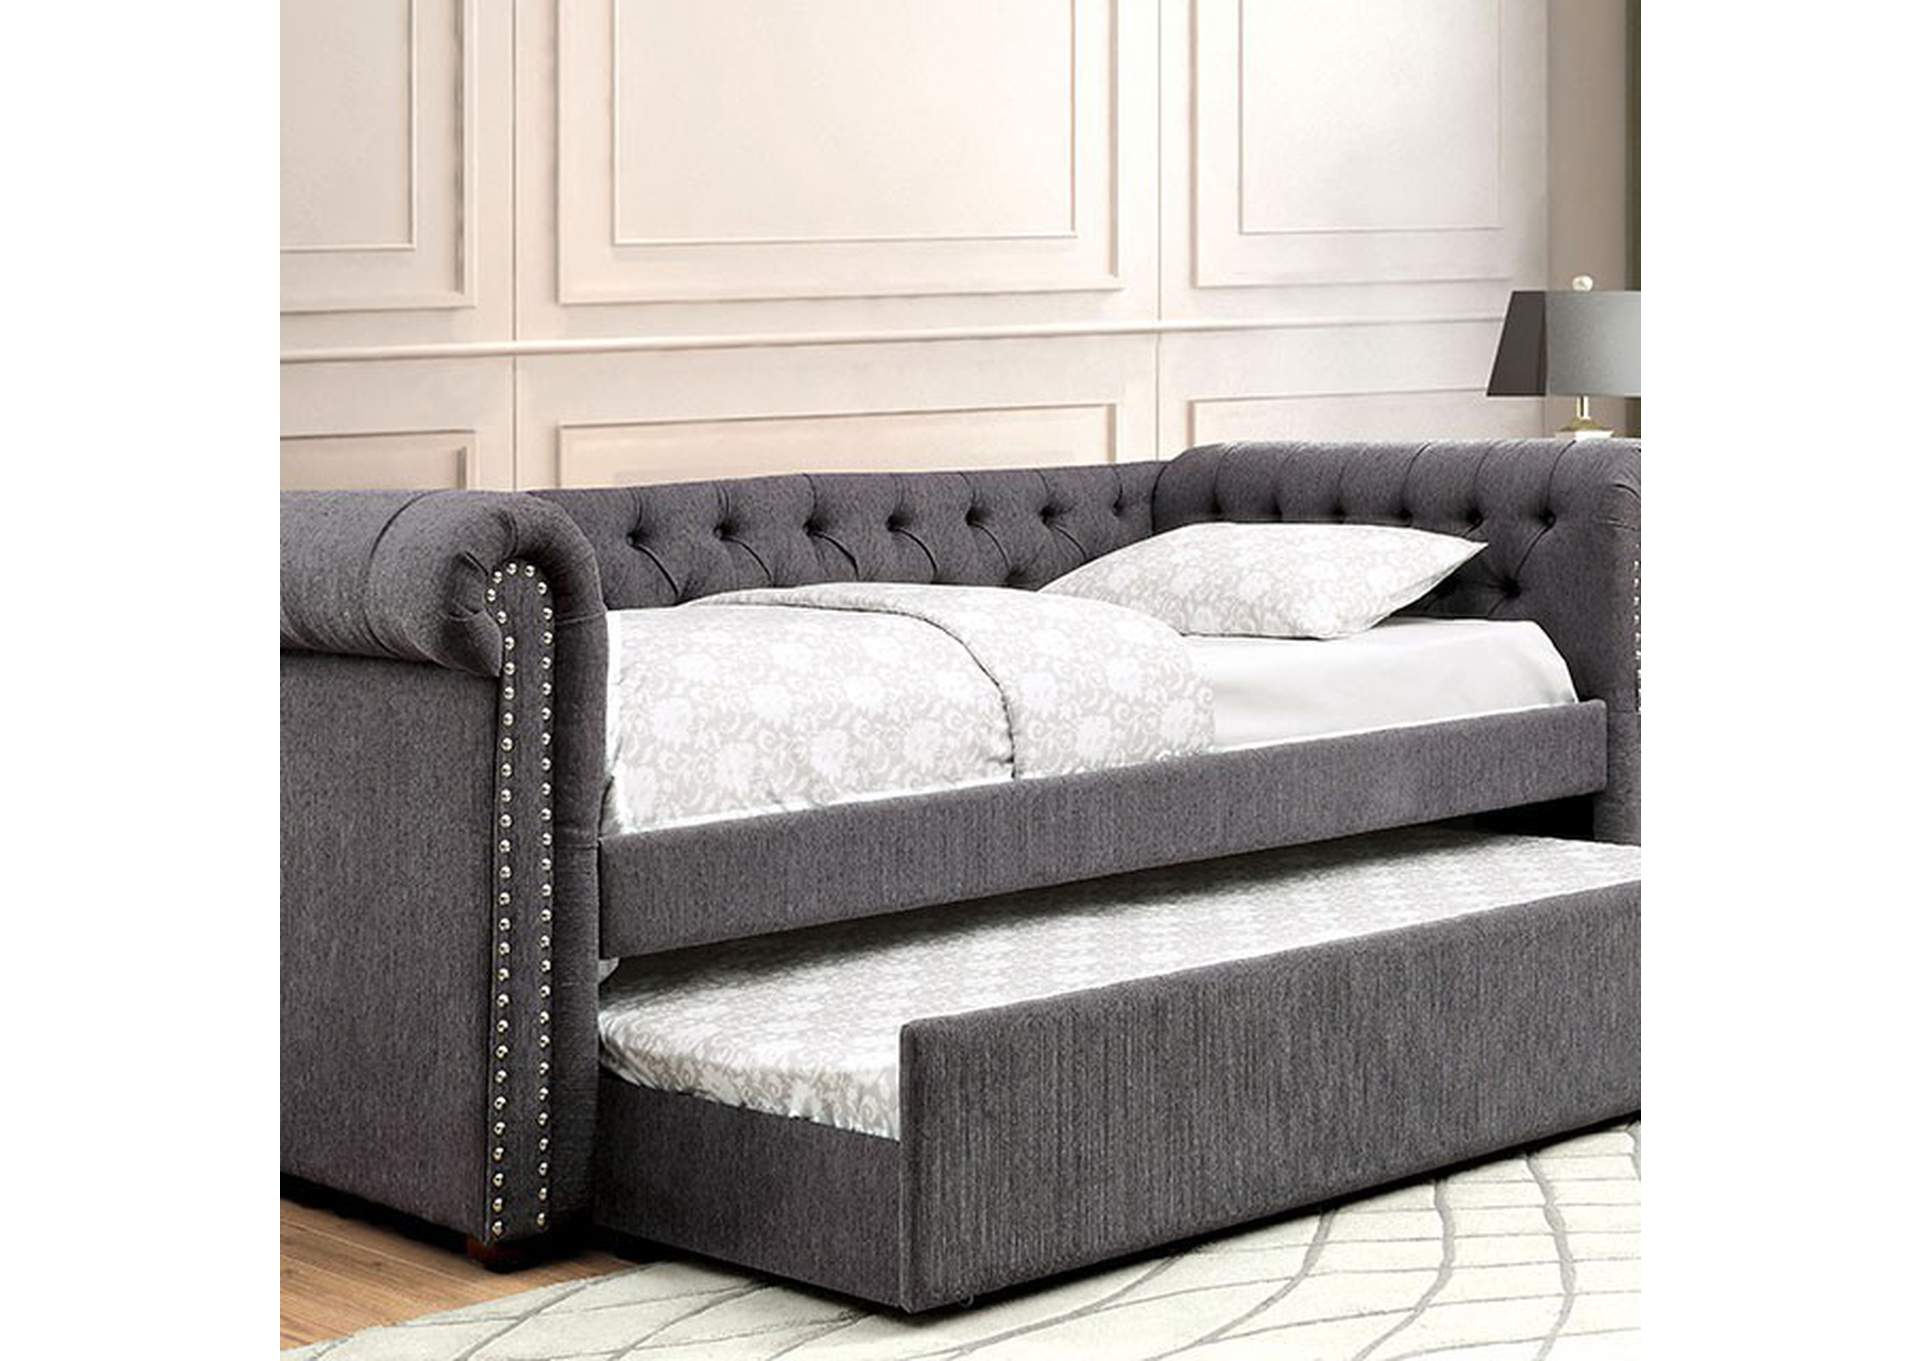 Leanna Queen Daybed w/ Trundle,Furniture of America